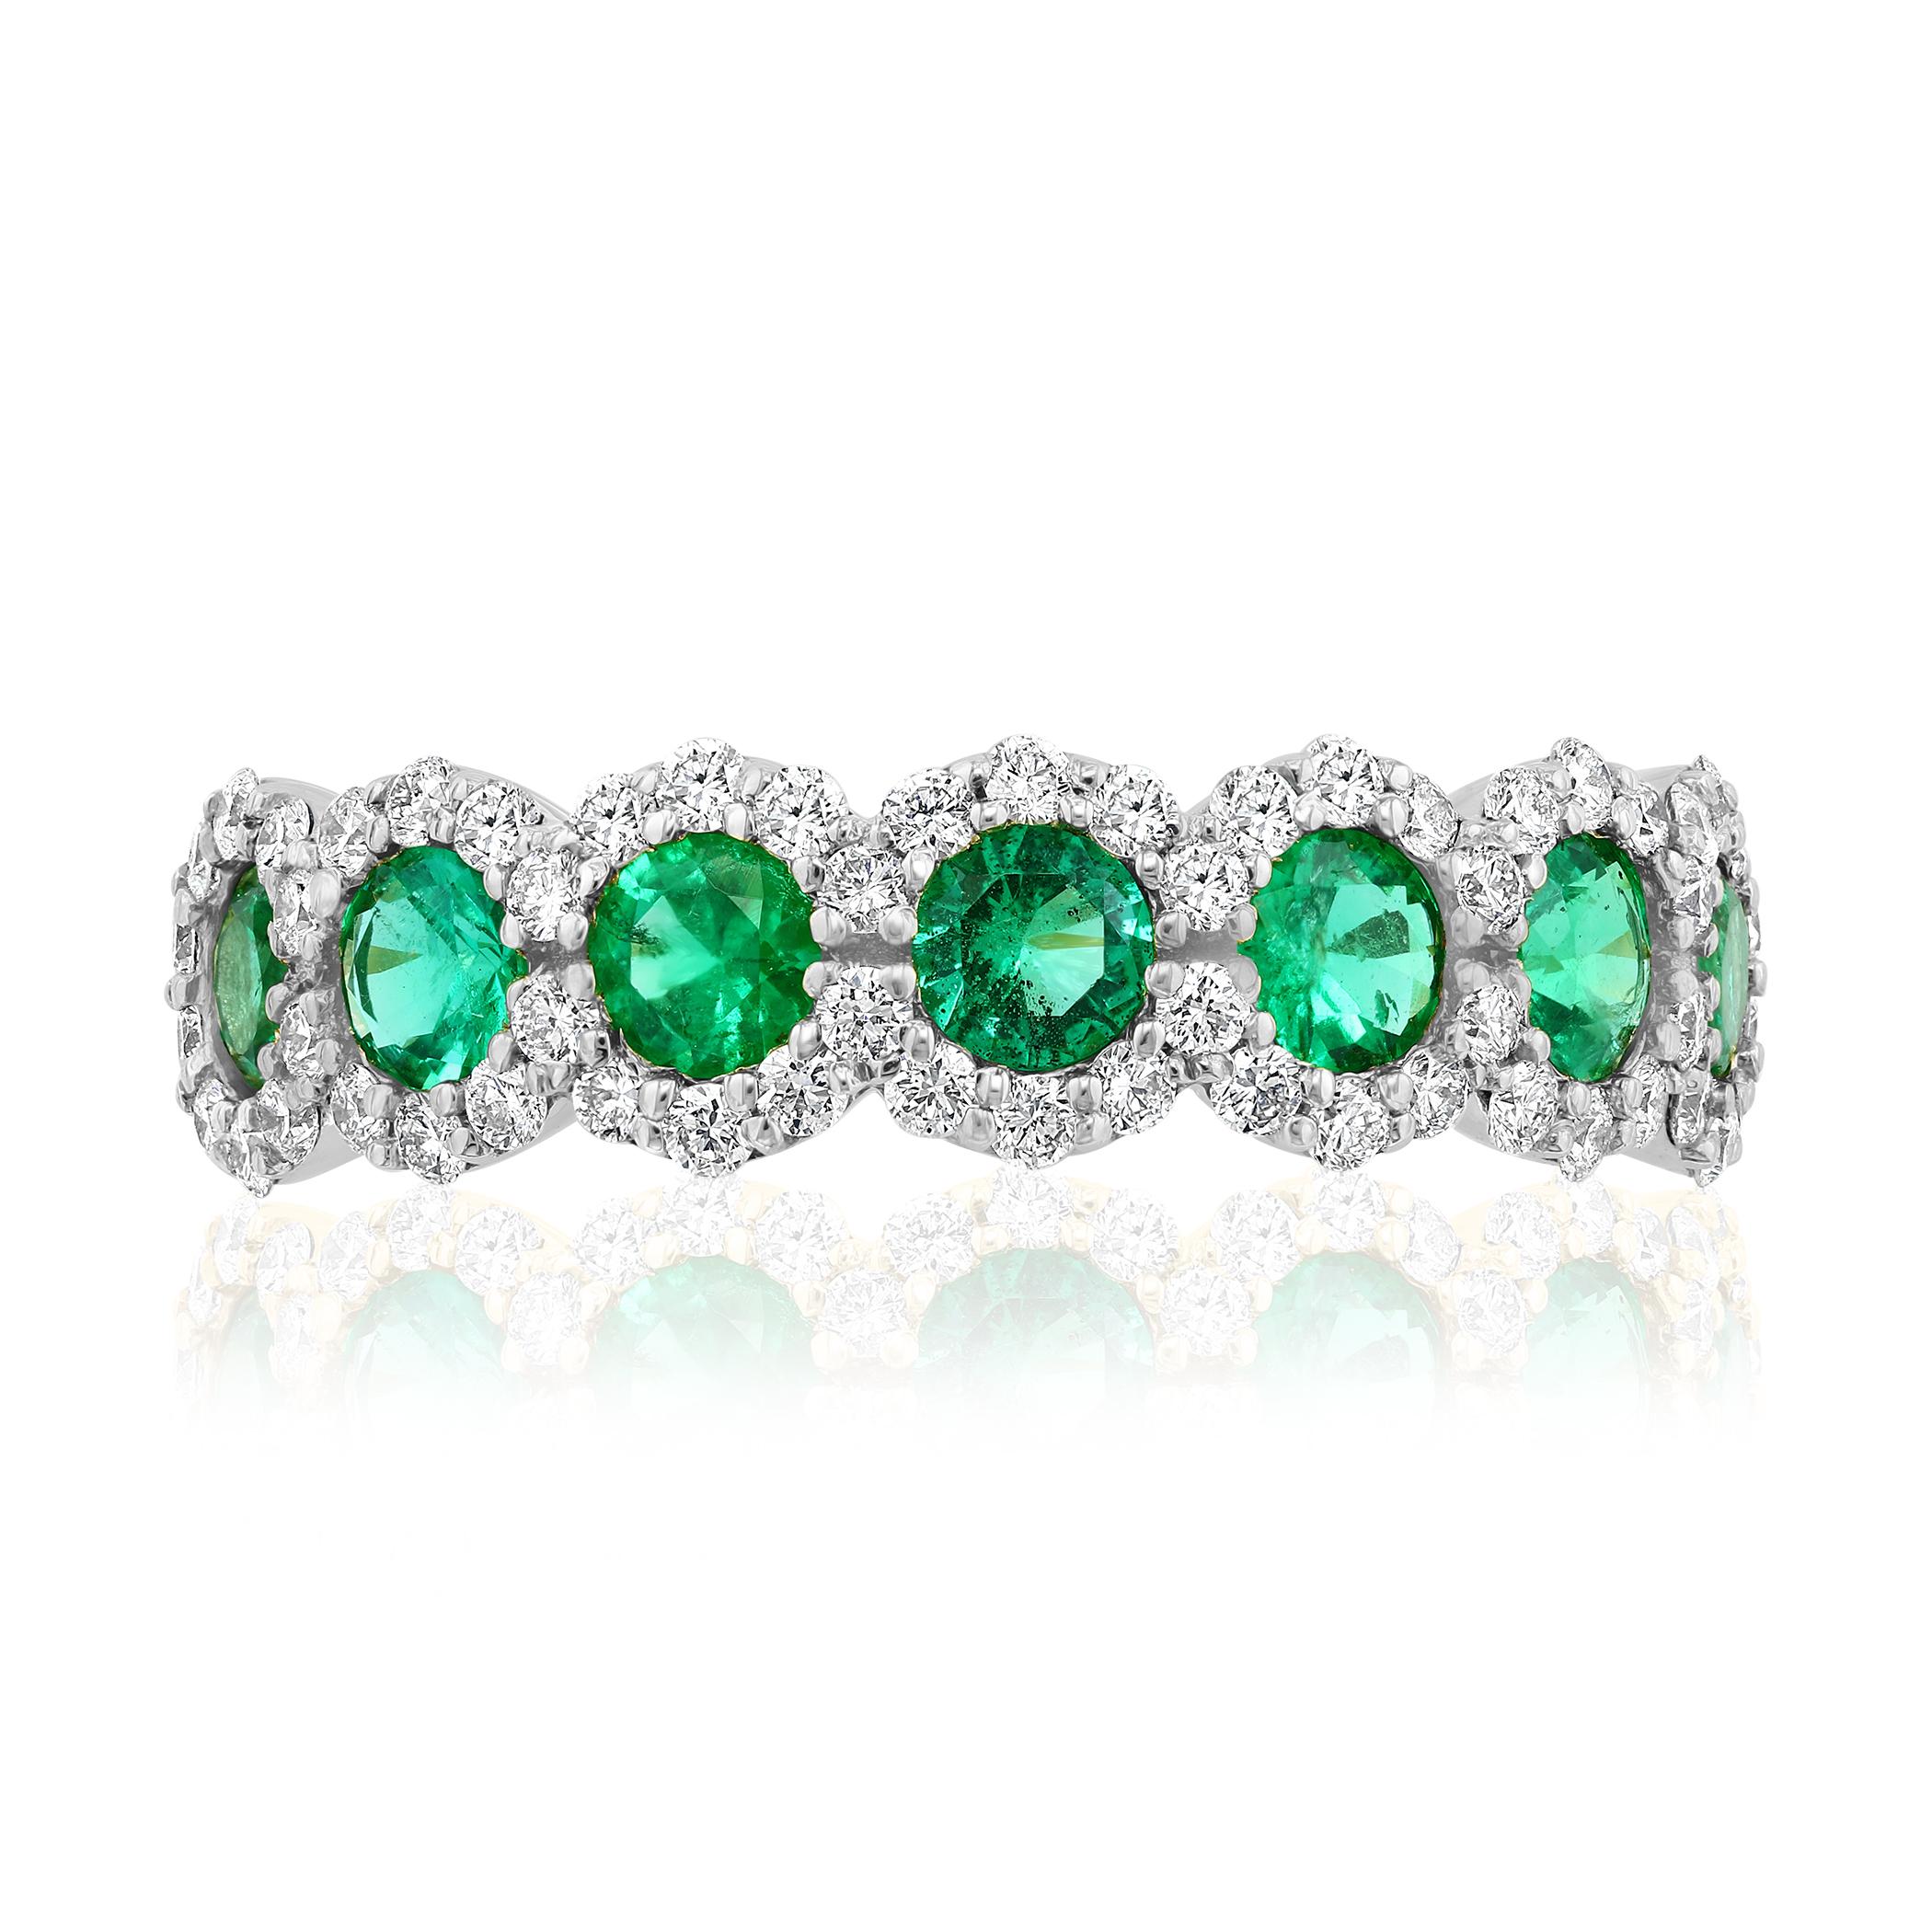 A fashionable and classic wedding band showcasing 7 color-rich green emeralds weighing 0.75 carats total that are surrounded by brilliant round diamonds weighing 1.00 carats total. Stones secured with a micro pave setting made with 14karat white